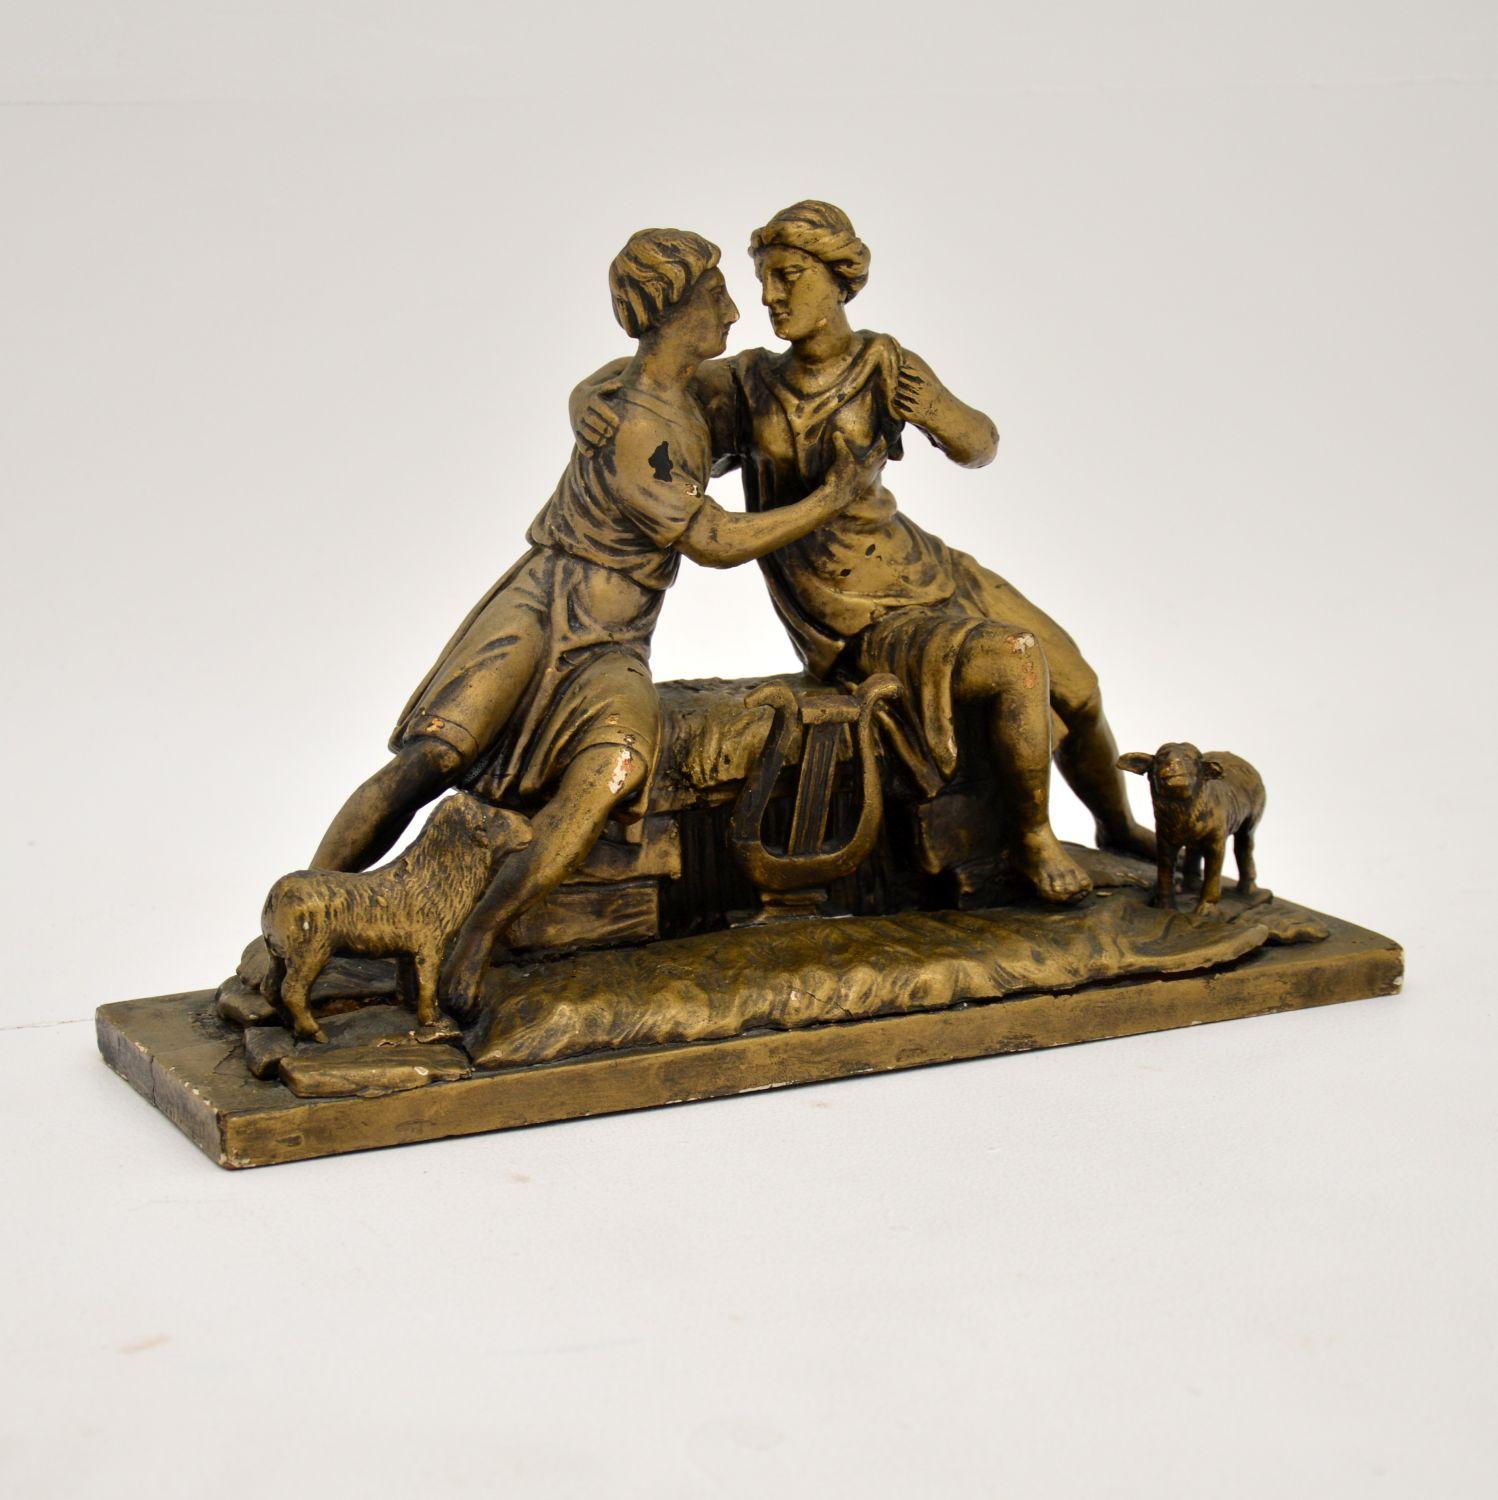 A beautiful and very unusual antique sculpture, carved from solid wood. This looks like it is most likely Italian, it depicts an intimate scene from biblical times. It is hard to date this, it could be 100 years old, or it could be much, much